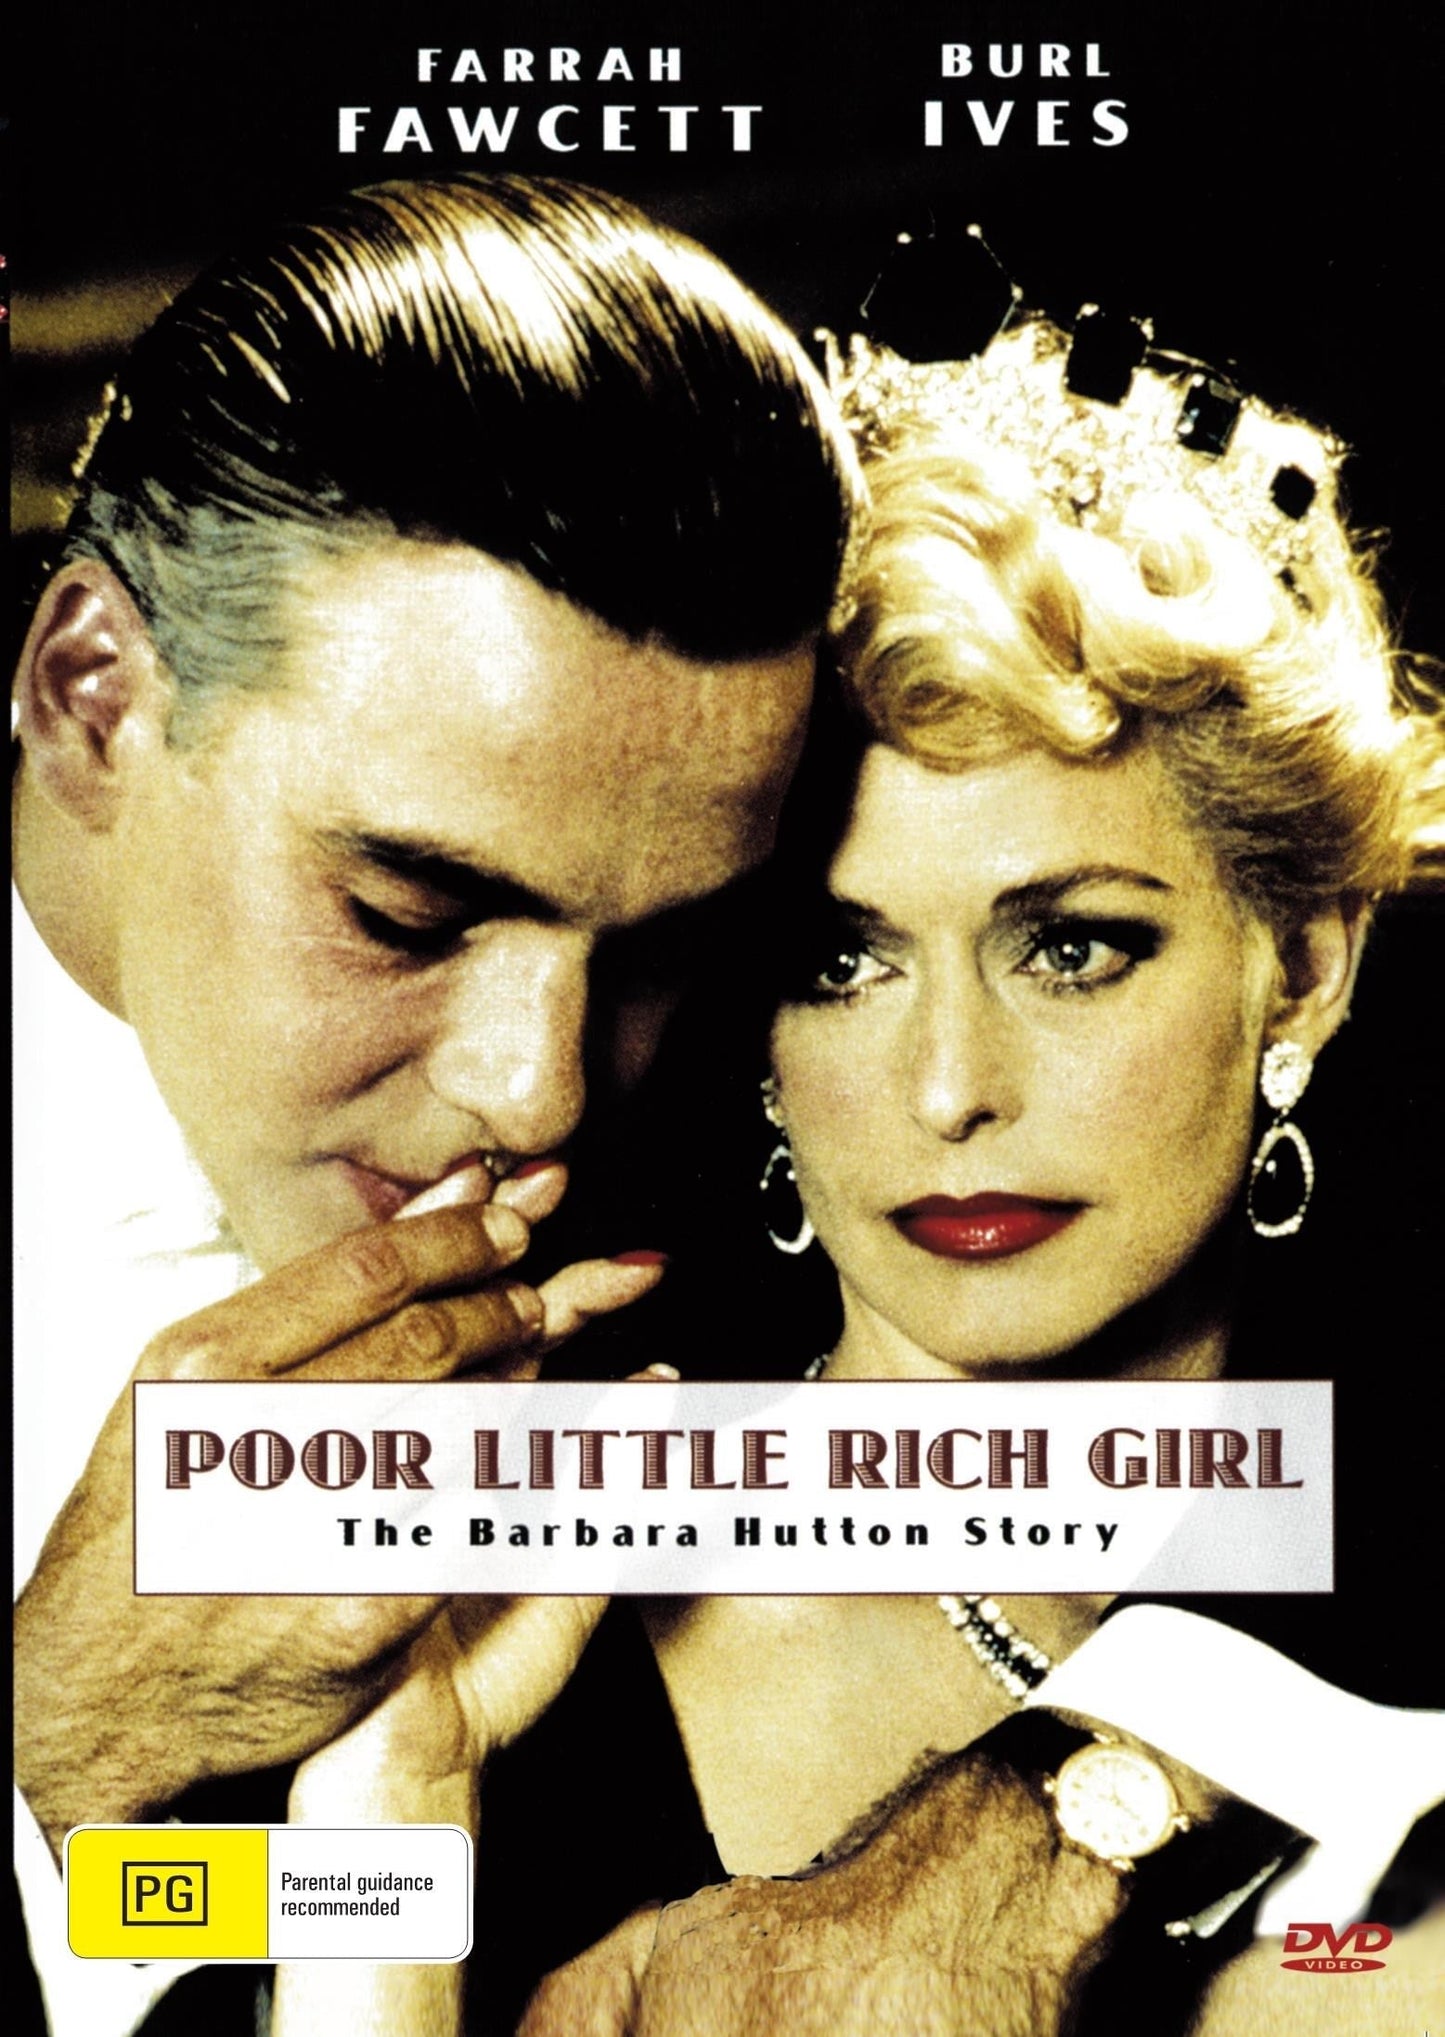 Poor Little Rich Girl : The Barbara Hutton Story rareandcollectibledvds